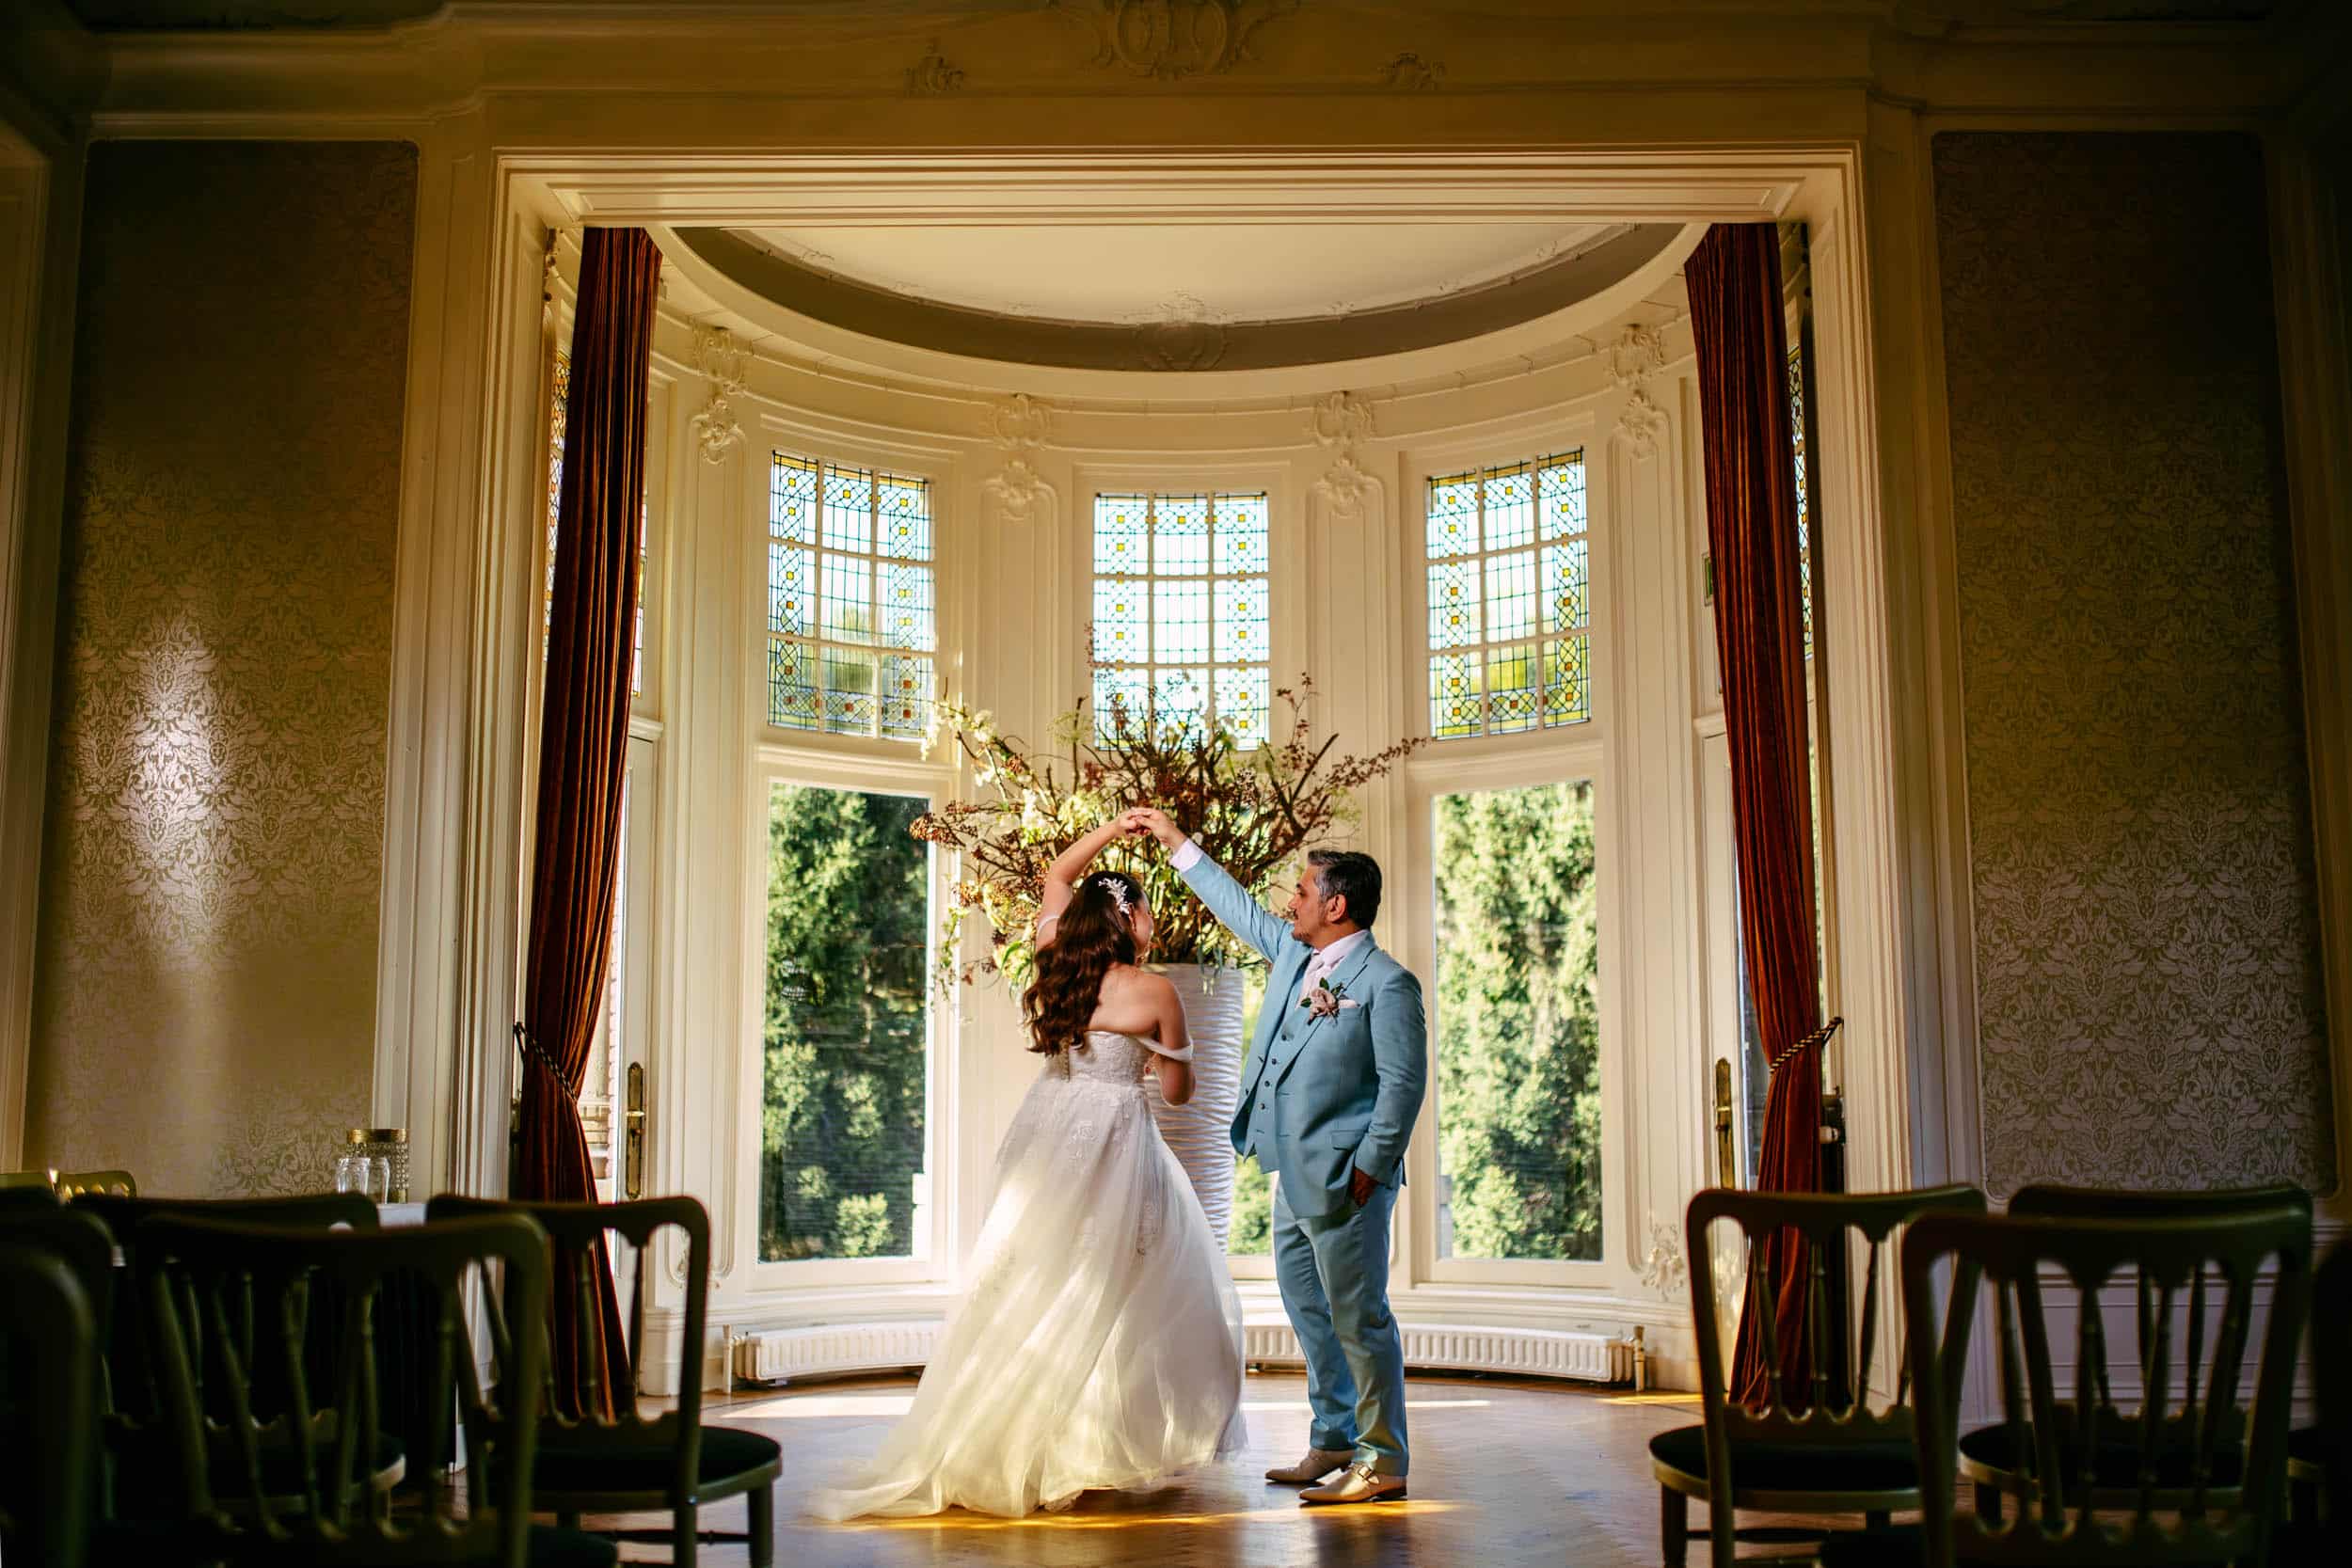 A bride and groom stand in front of a large window.